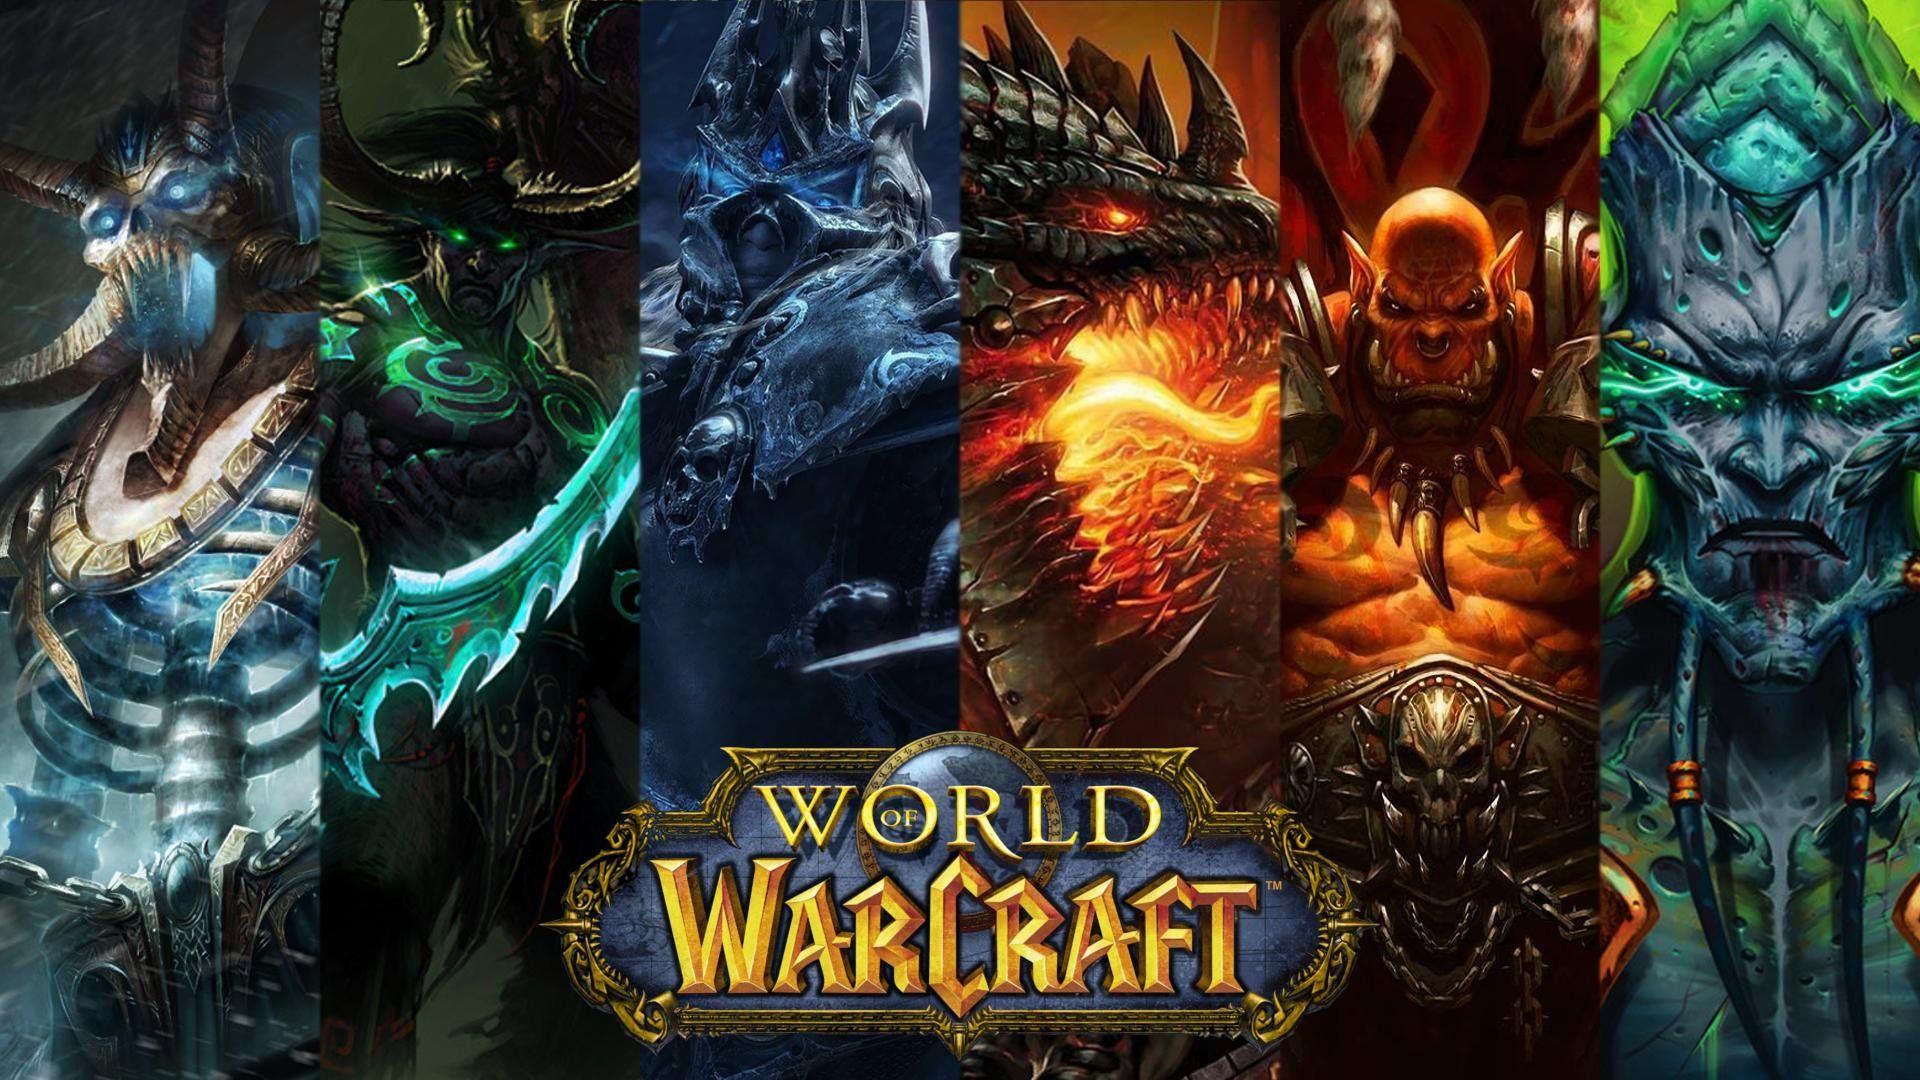 world of warcraft wallpapers top free world of warcraft backgrounds wallpaperaccess world of warcraft wallpapers top free